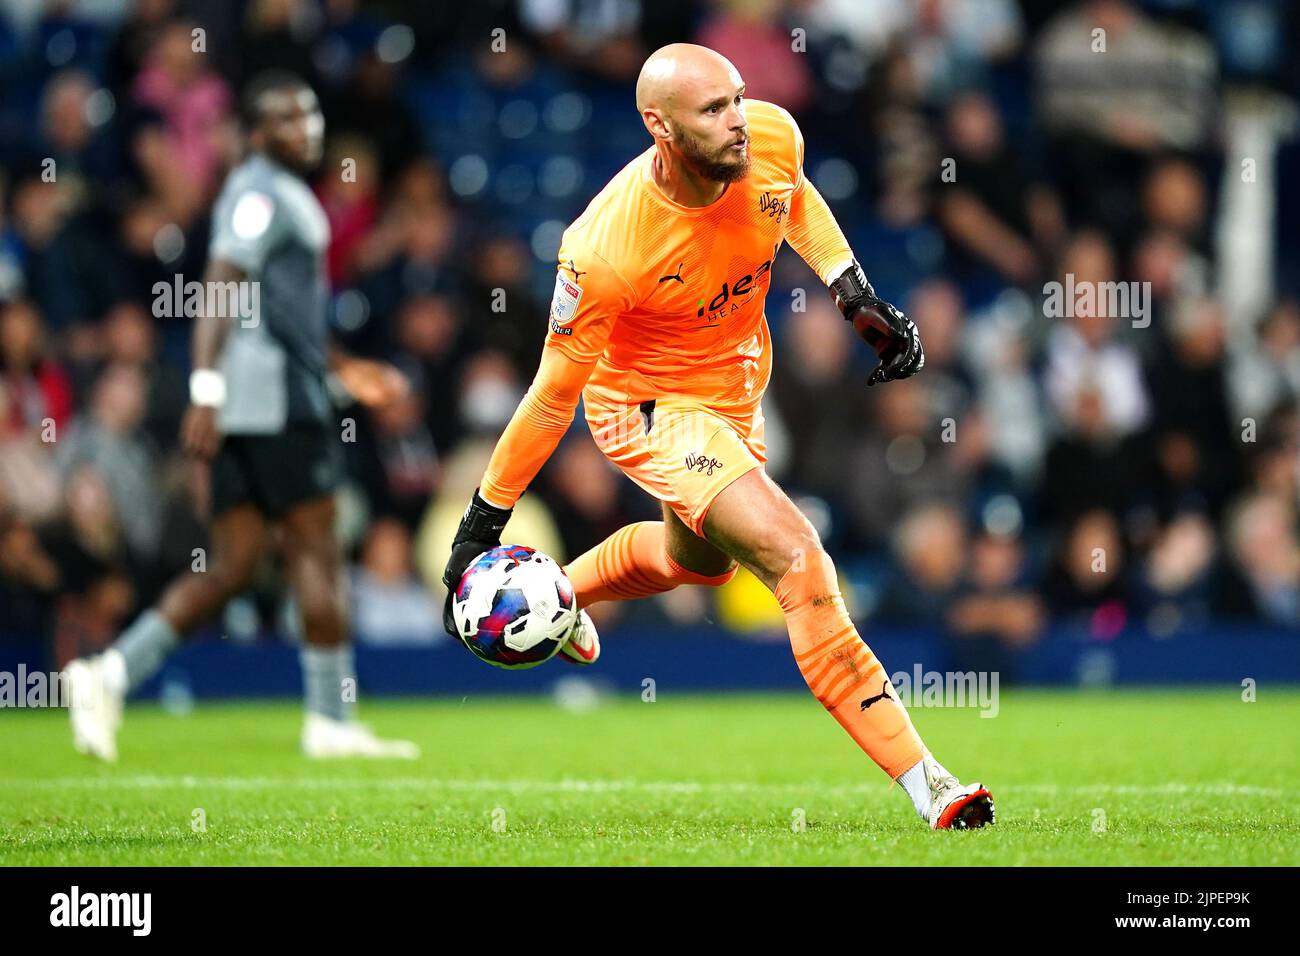 West Bromwich Albion goalkeeper David Button releases the ball during the Sky Bet Championship match at The Hawthorns, West Bromwich. Picture date: Wednesday August 17, 2022. Stock Photo